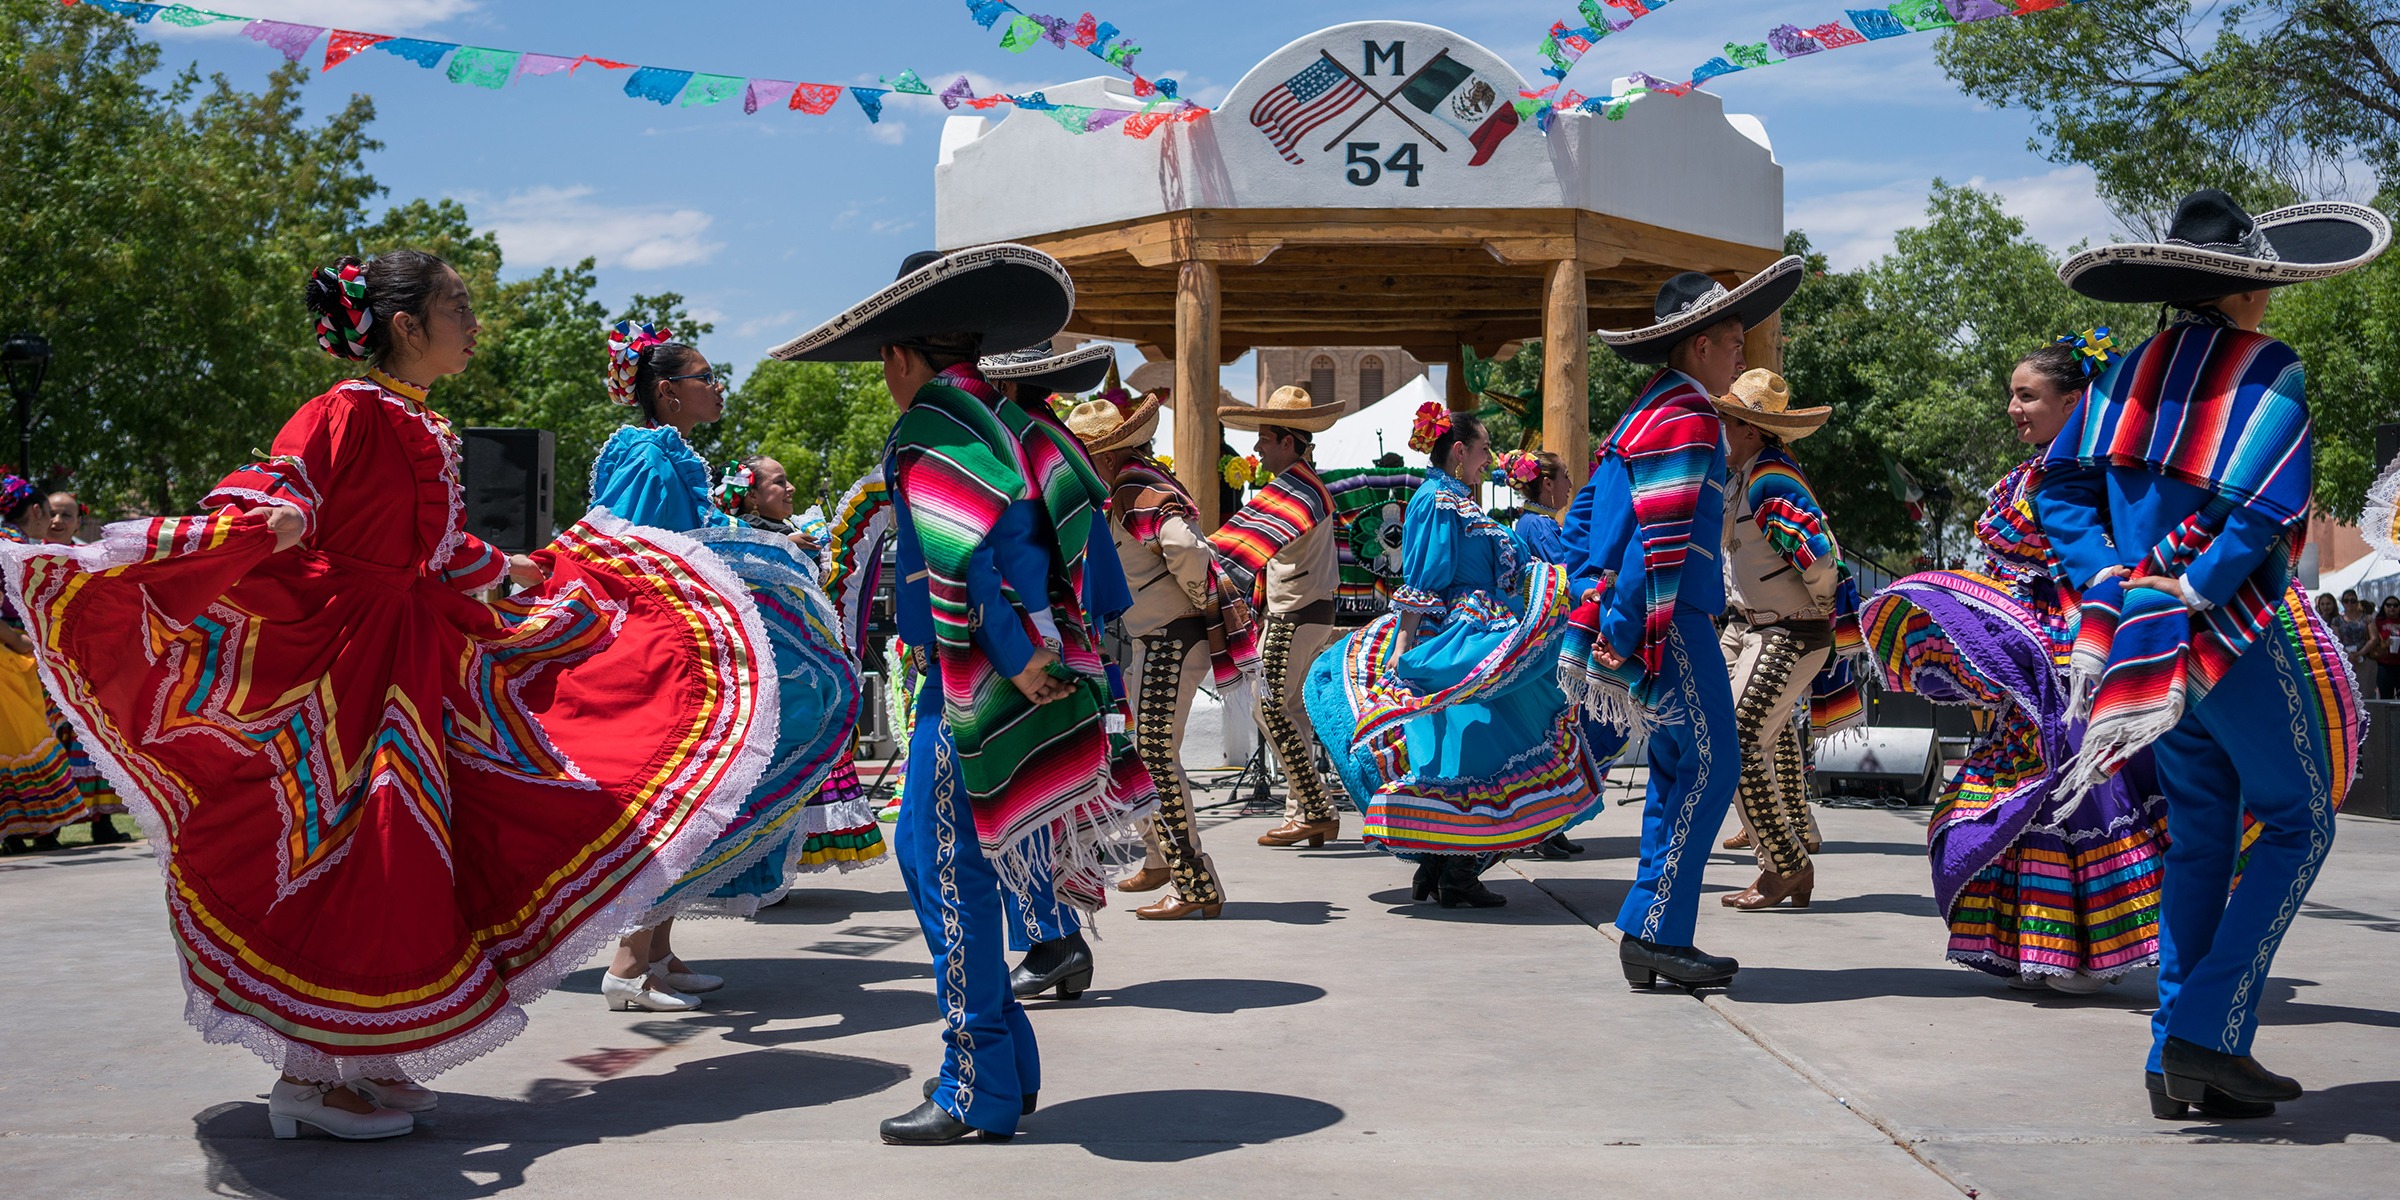 A parade celebrating Cinco de Mayo, with participants dressed in traditional Mexican attire, dancing and playing mariachi music.